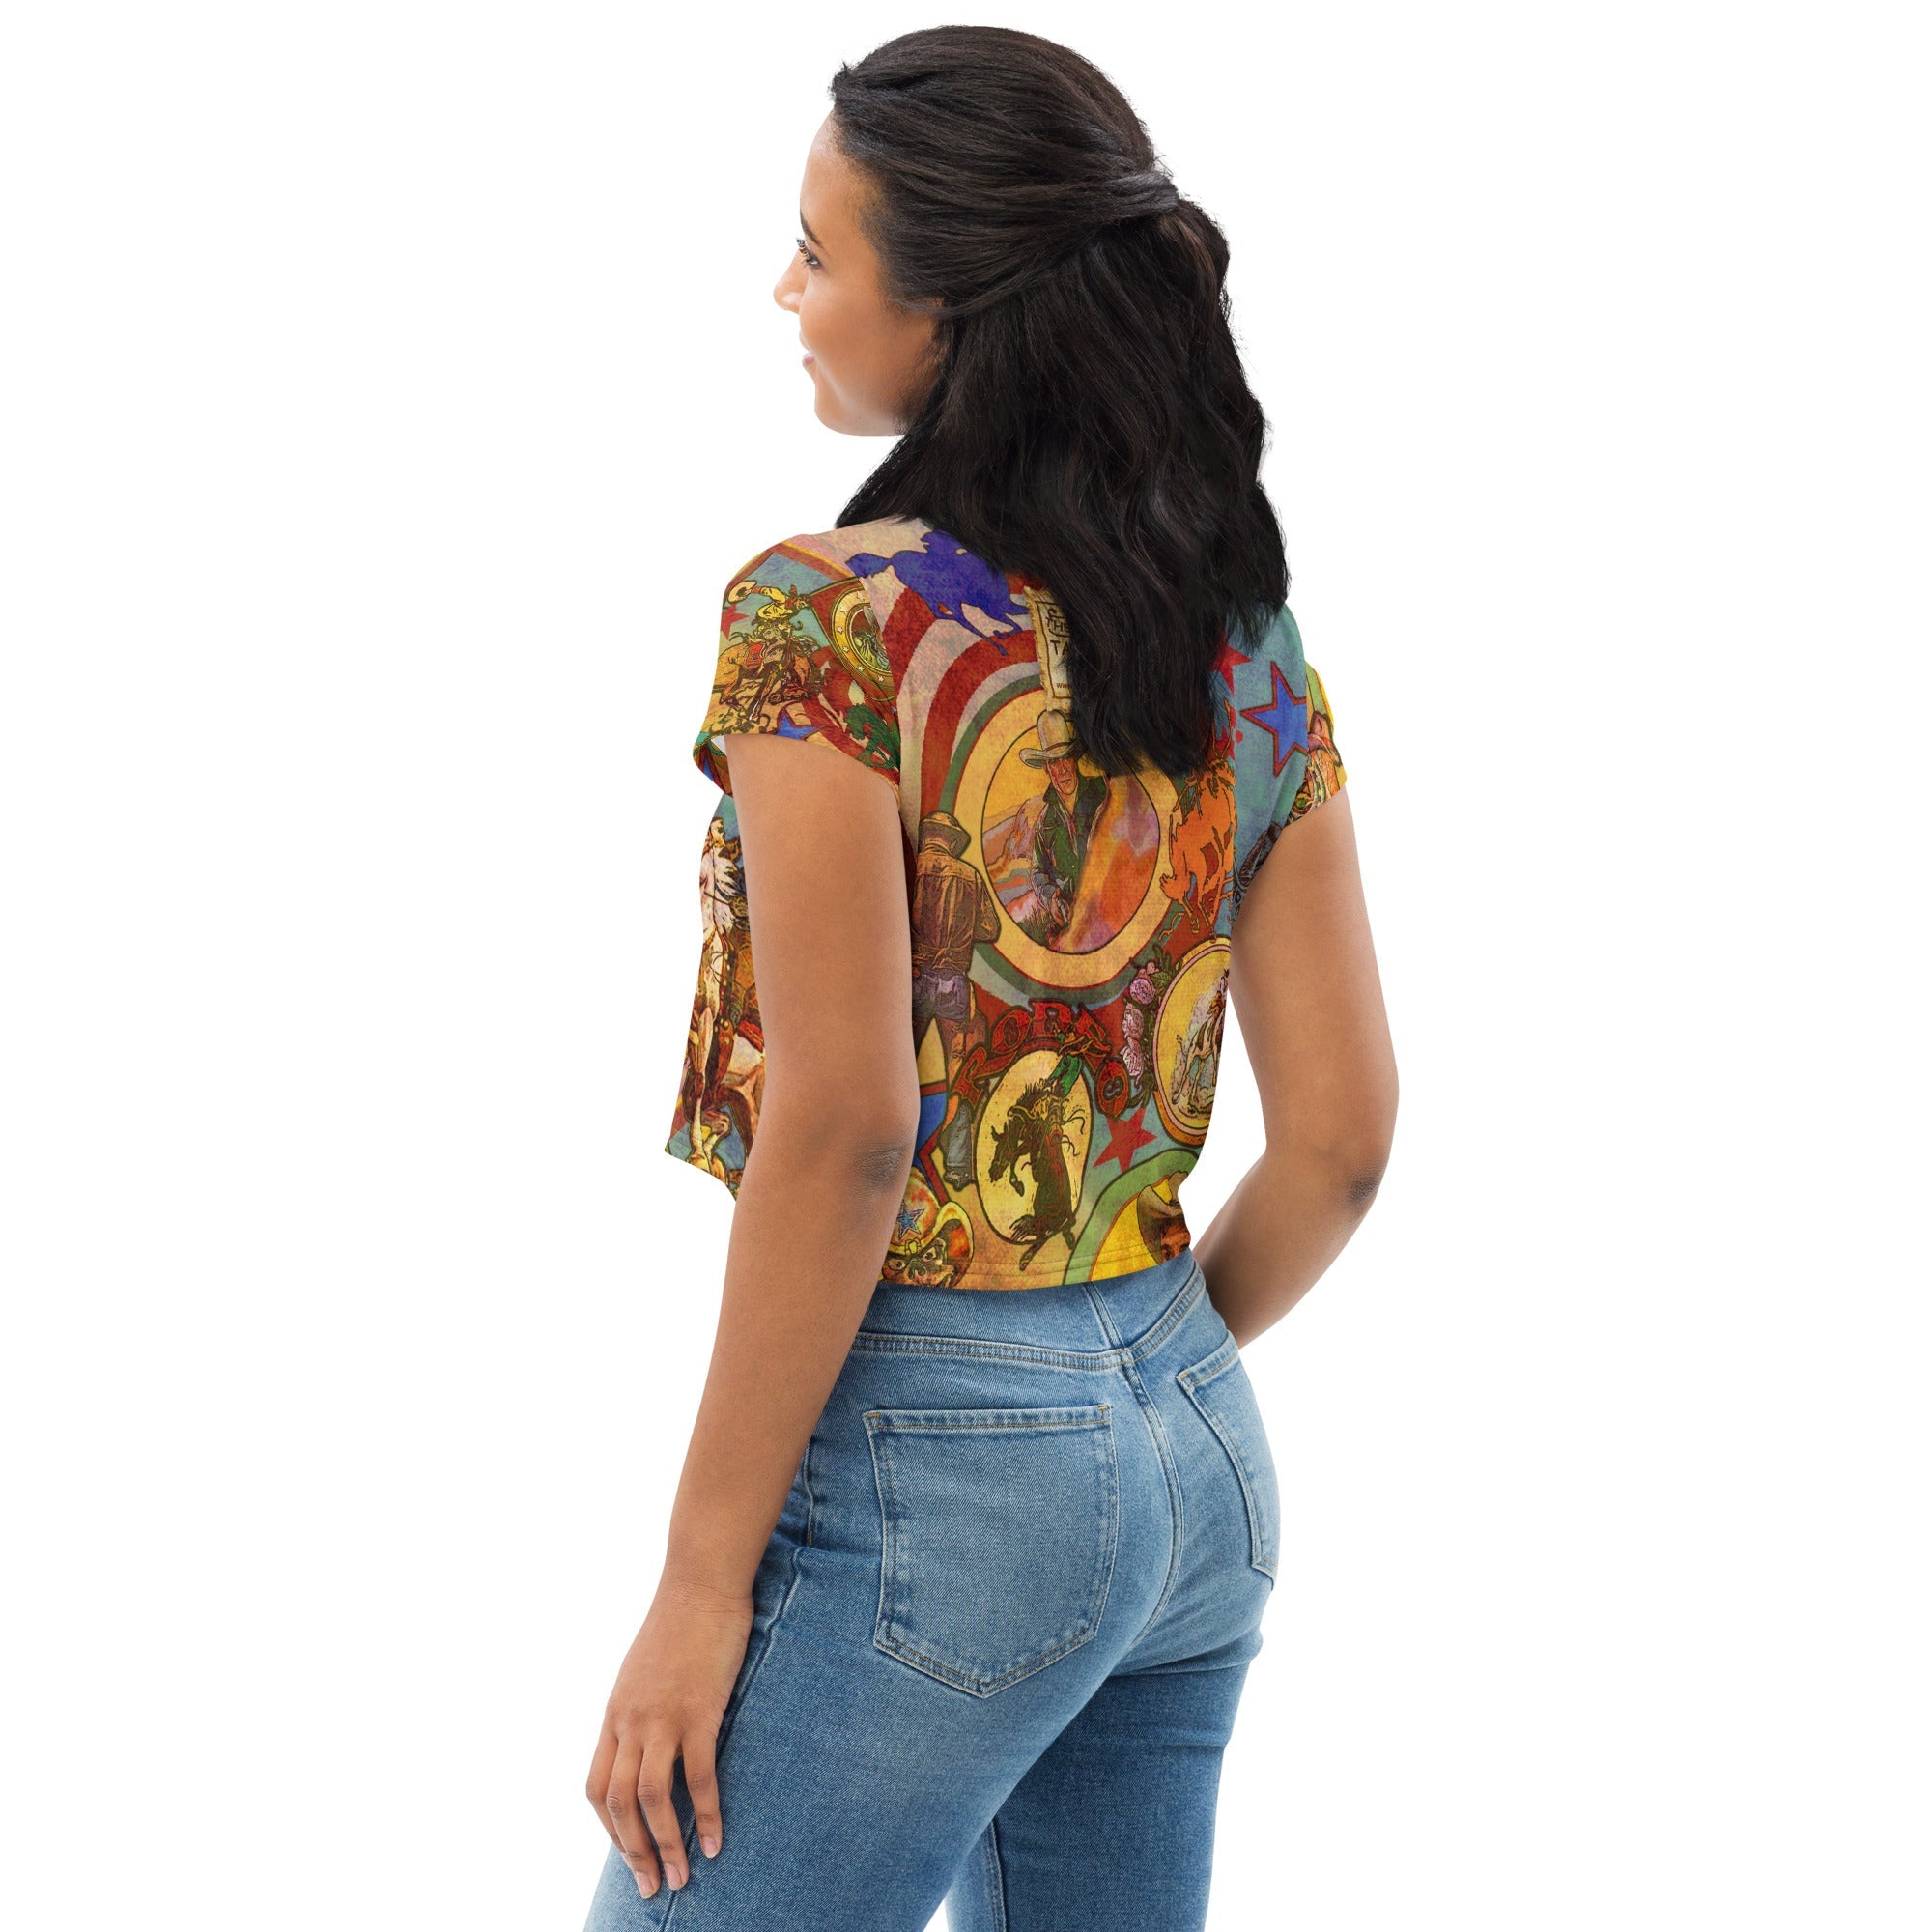 "COWGIRL TATTOO" CROP TOP FOR WOMEN